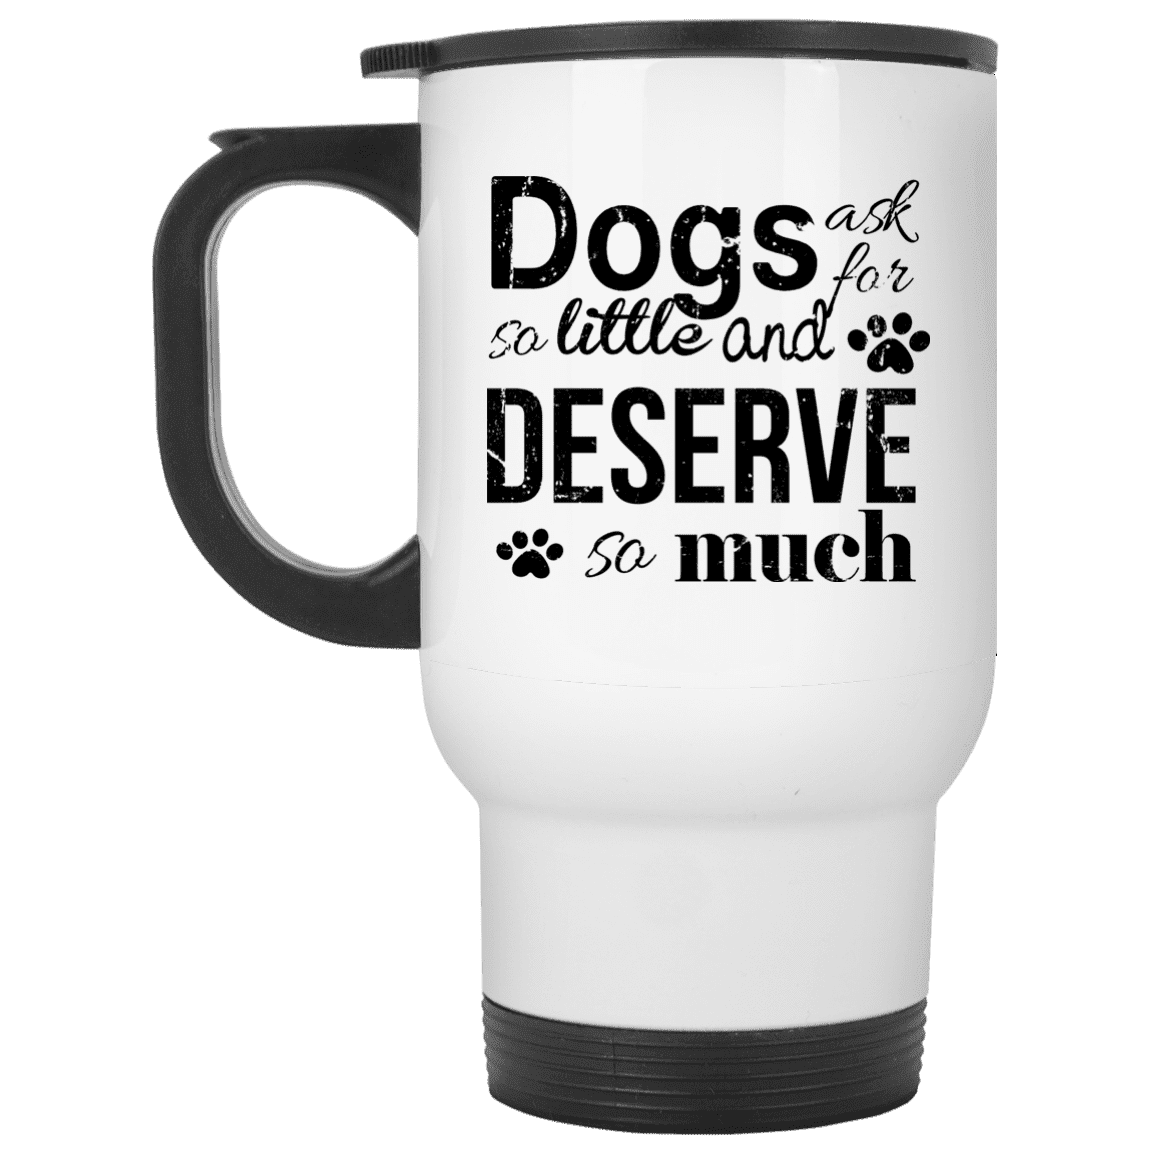 Dogs Deserve So Much - Mugs.